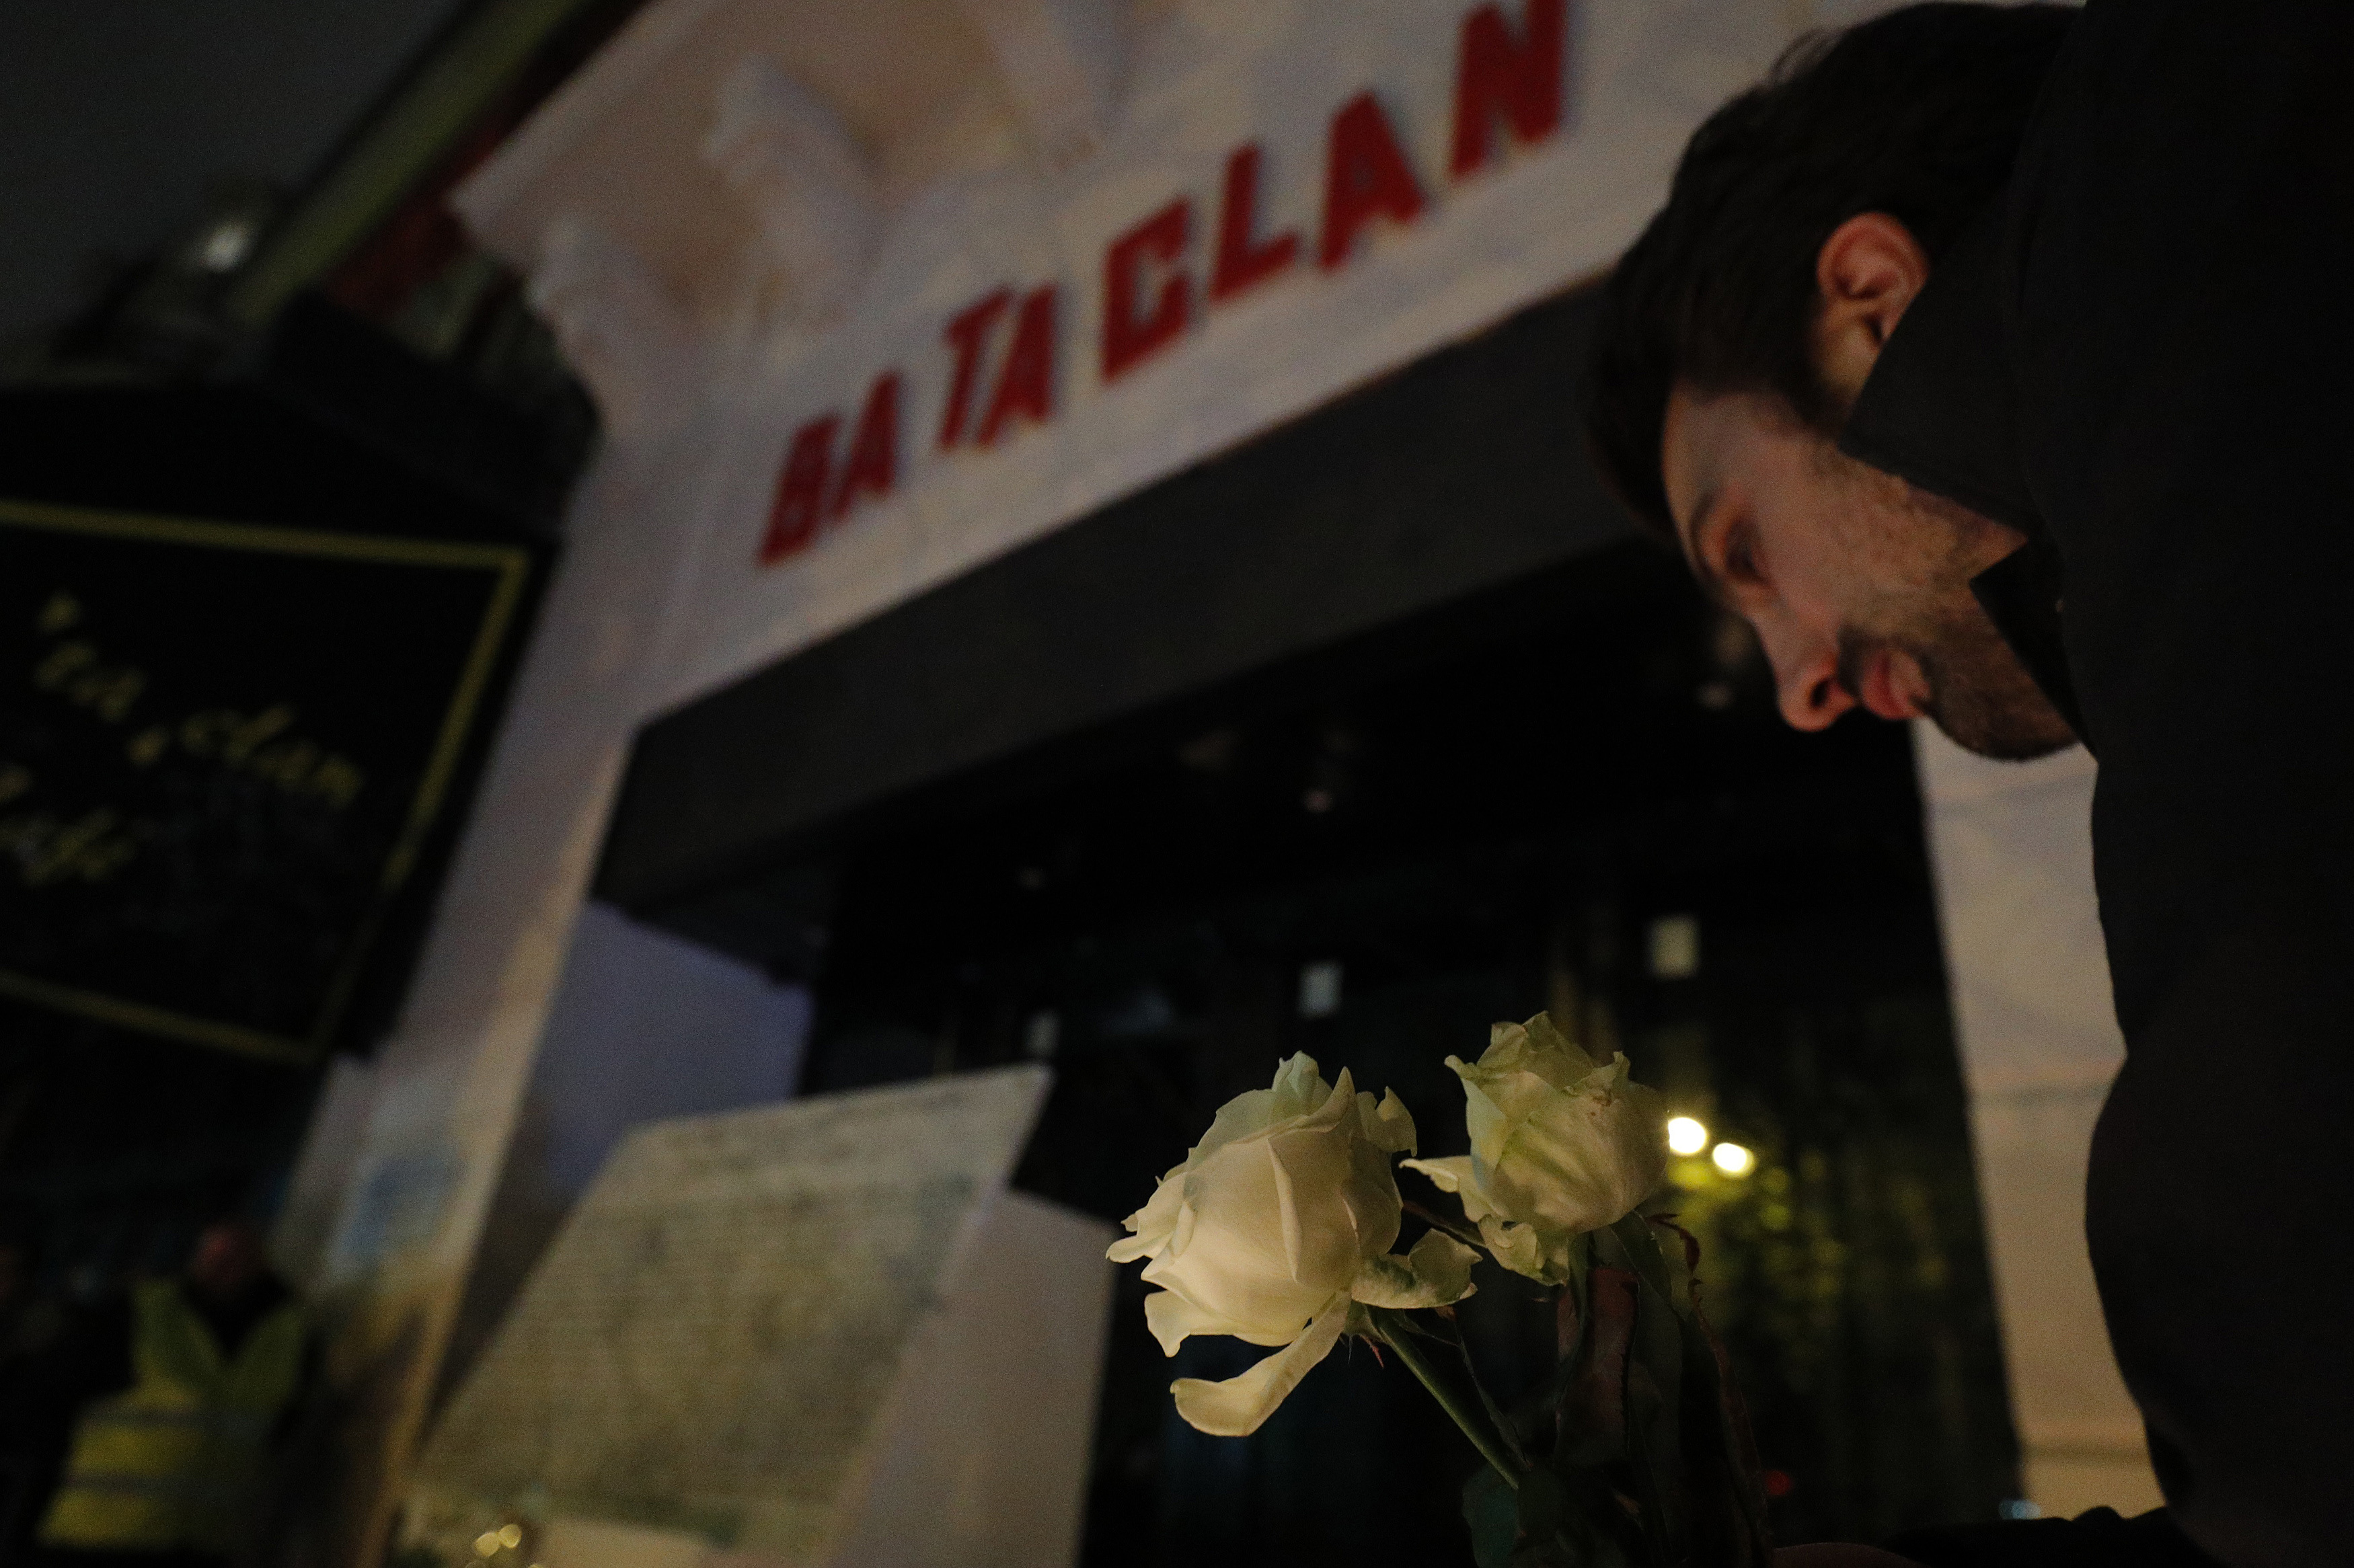 A man lays a white rose next to a commemorative plaque unveiled by French President Francois Hollande and Paris Mayor Anne Hidalgo during a gathering in front of the Bataclan concert hall in Paris